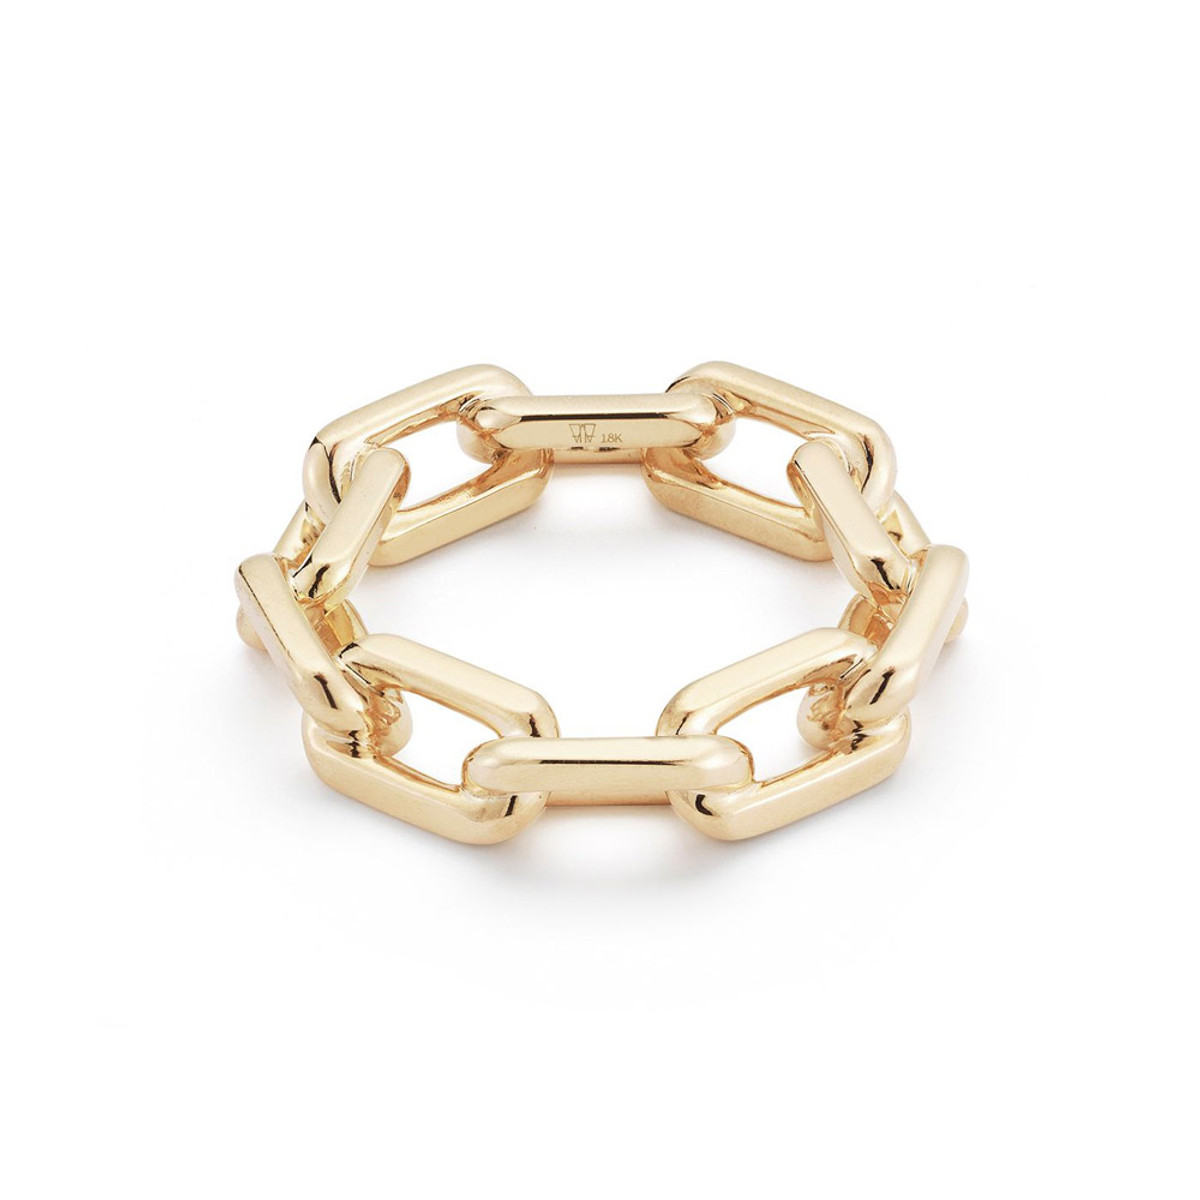 Walters Faith Saxon 18K Yellow Gold Large Chain Link Ring, Size 7-56171